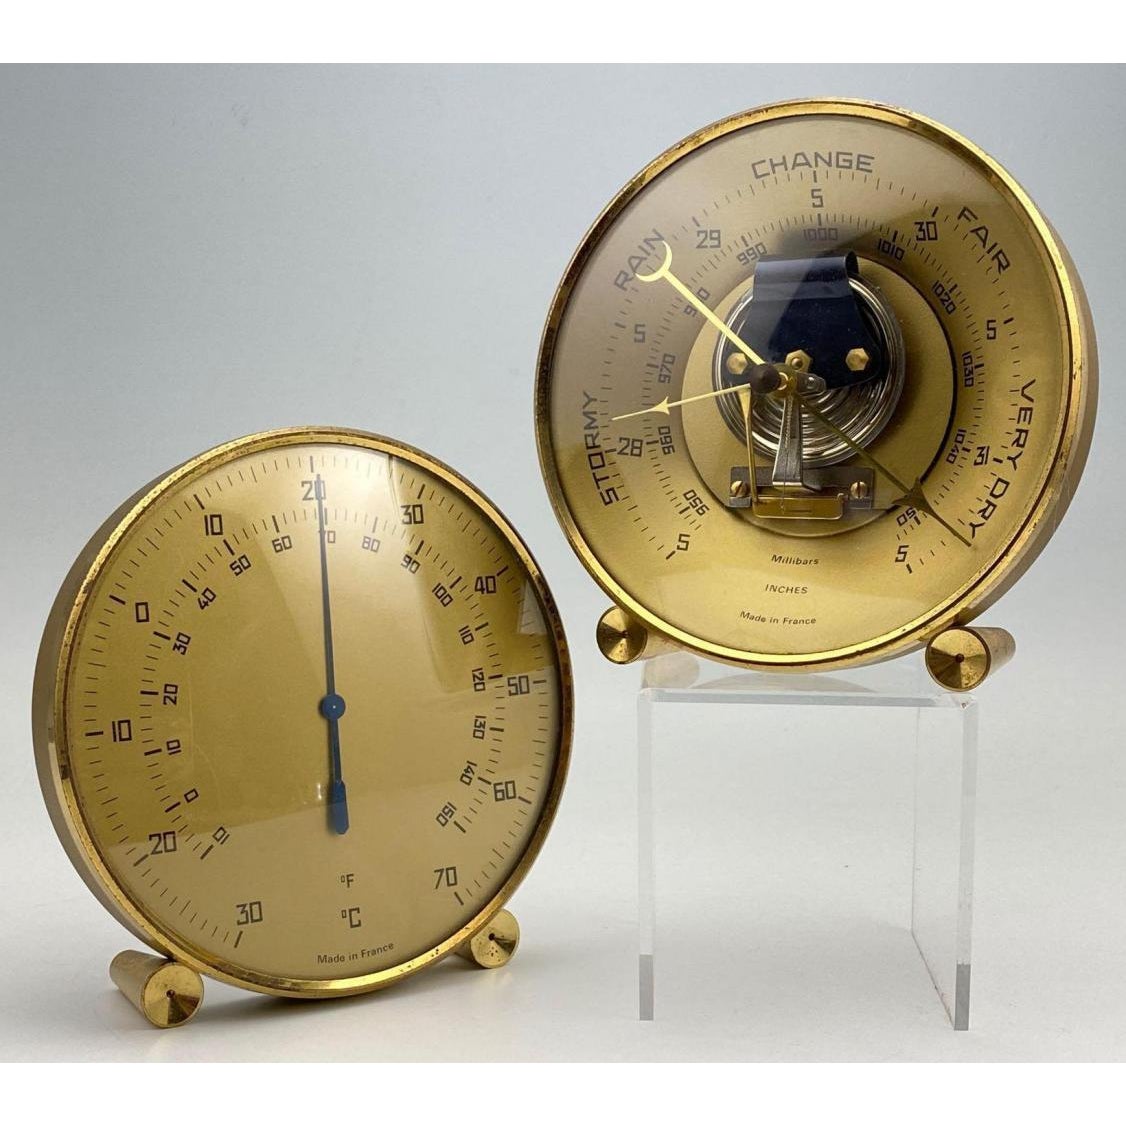 https://www.greatfindsdesign.com/wp-content/uploads/french-modernist-brass-barometer-and-thermometer-5289.jpg